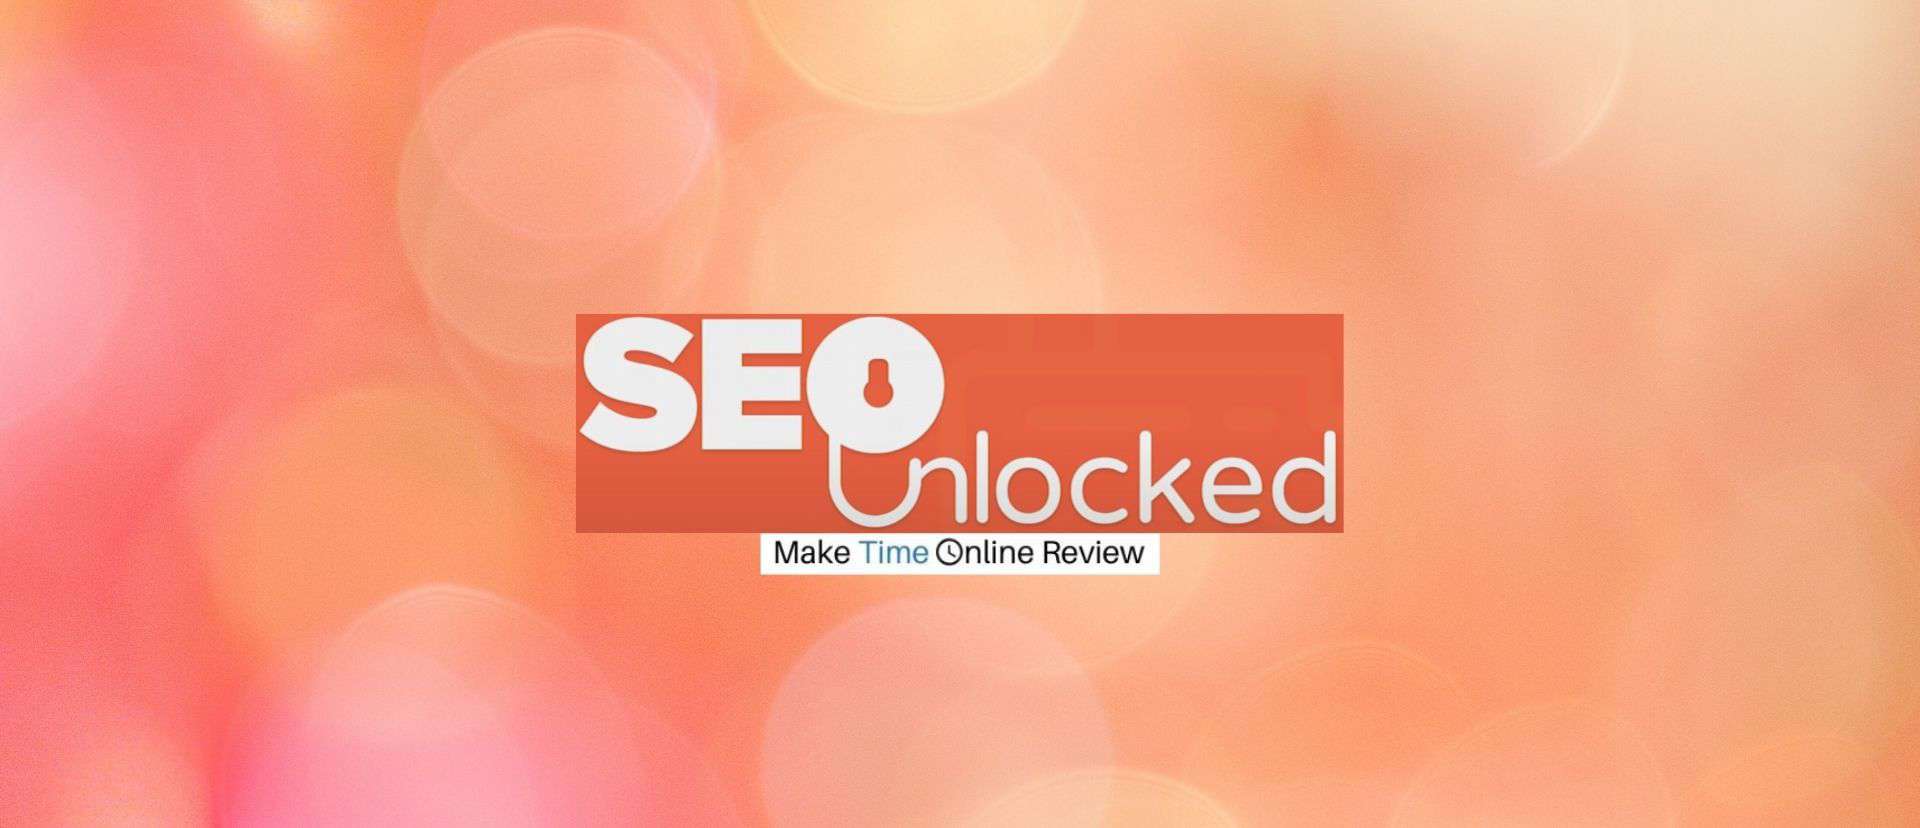 SEO Unlocked Review: Featured Image